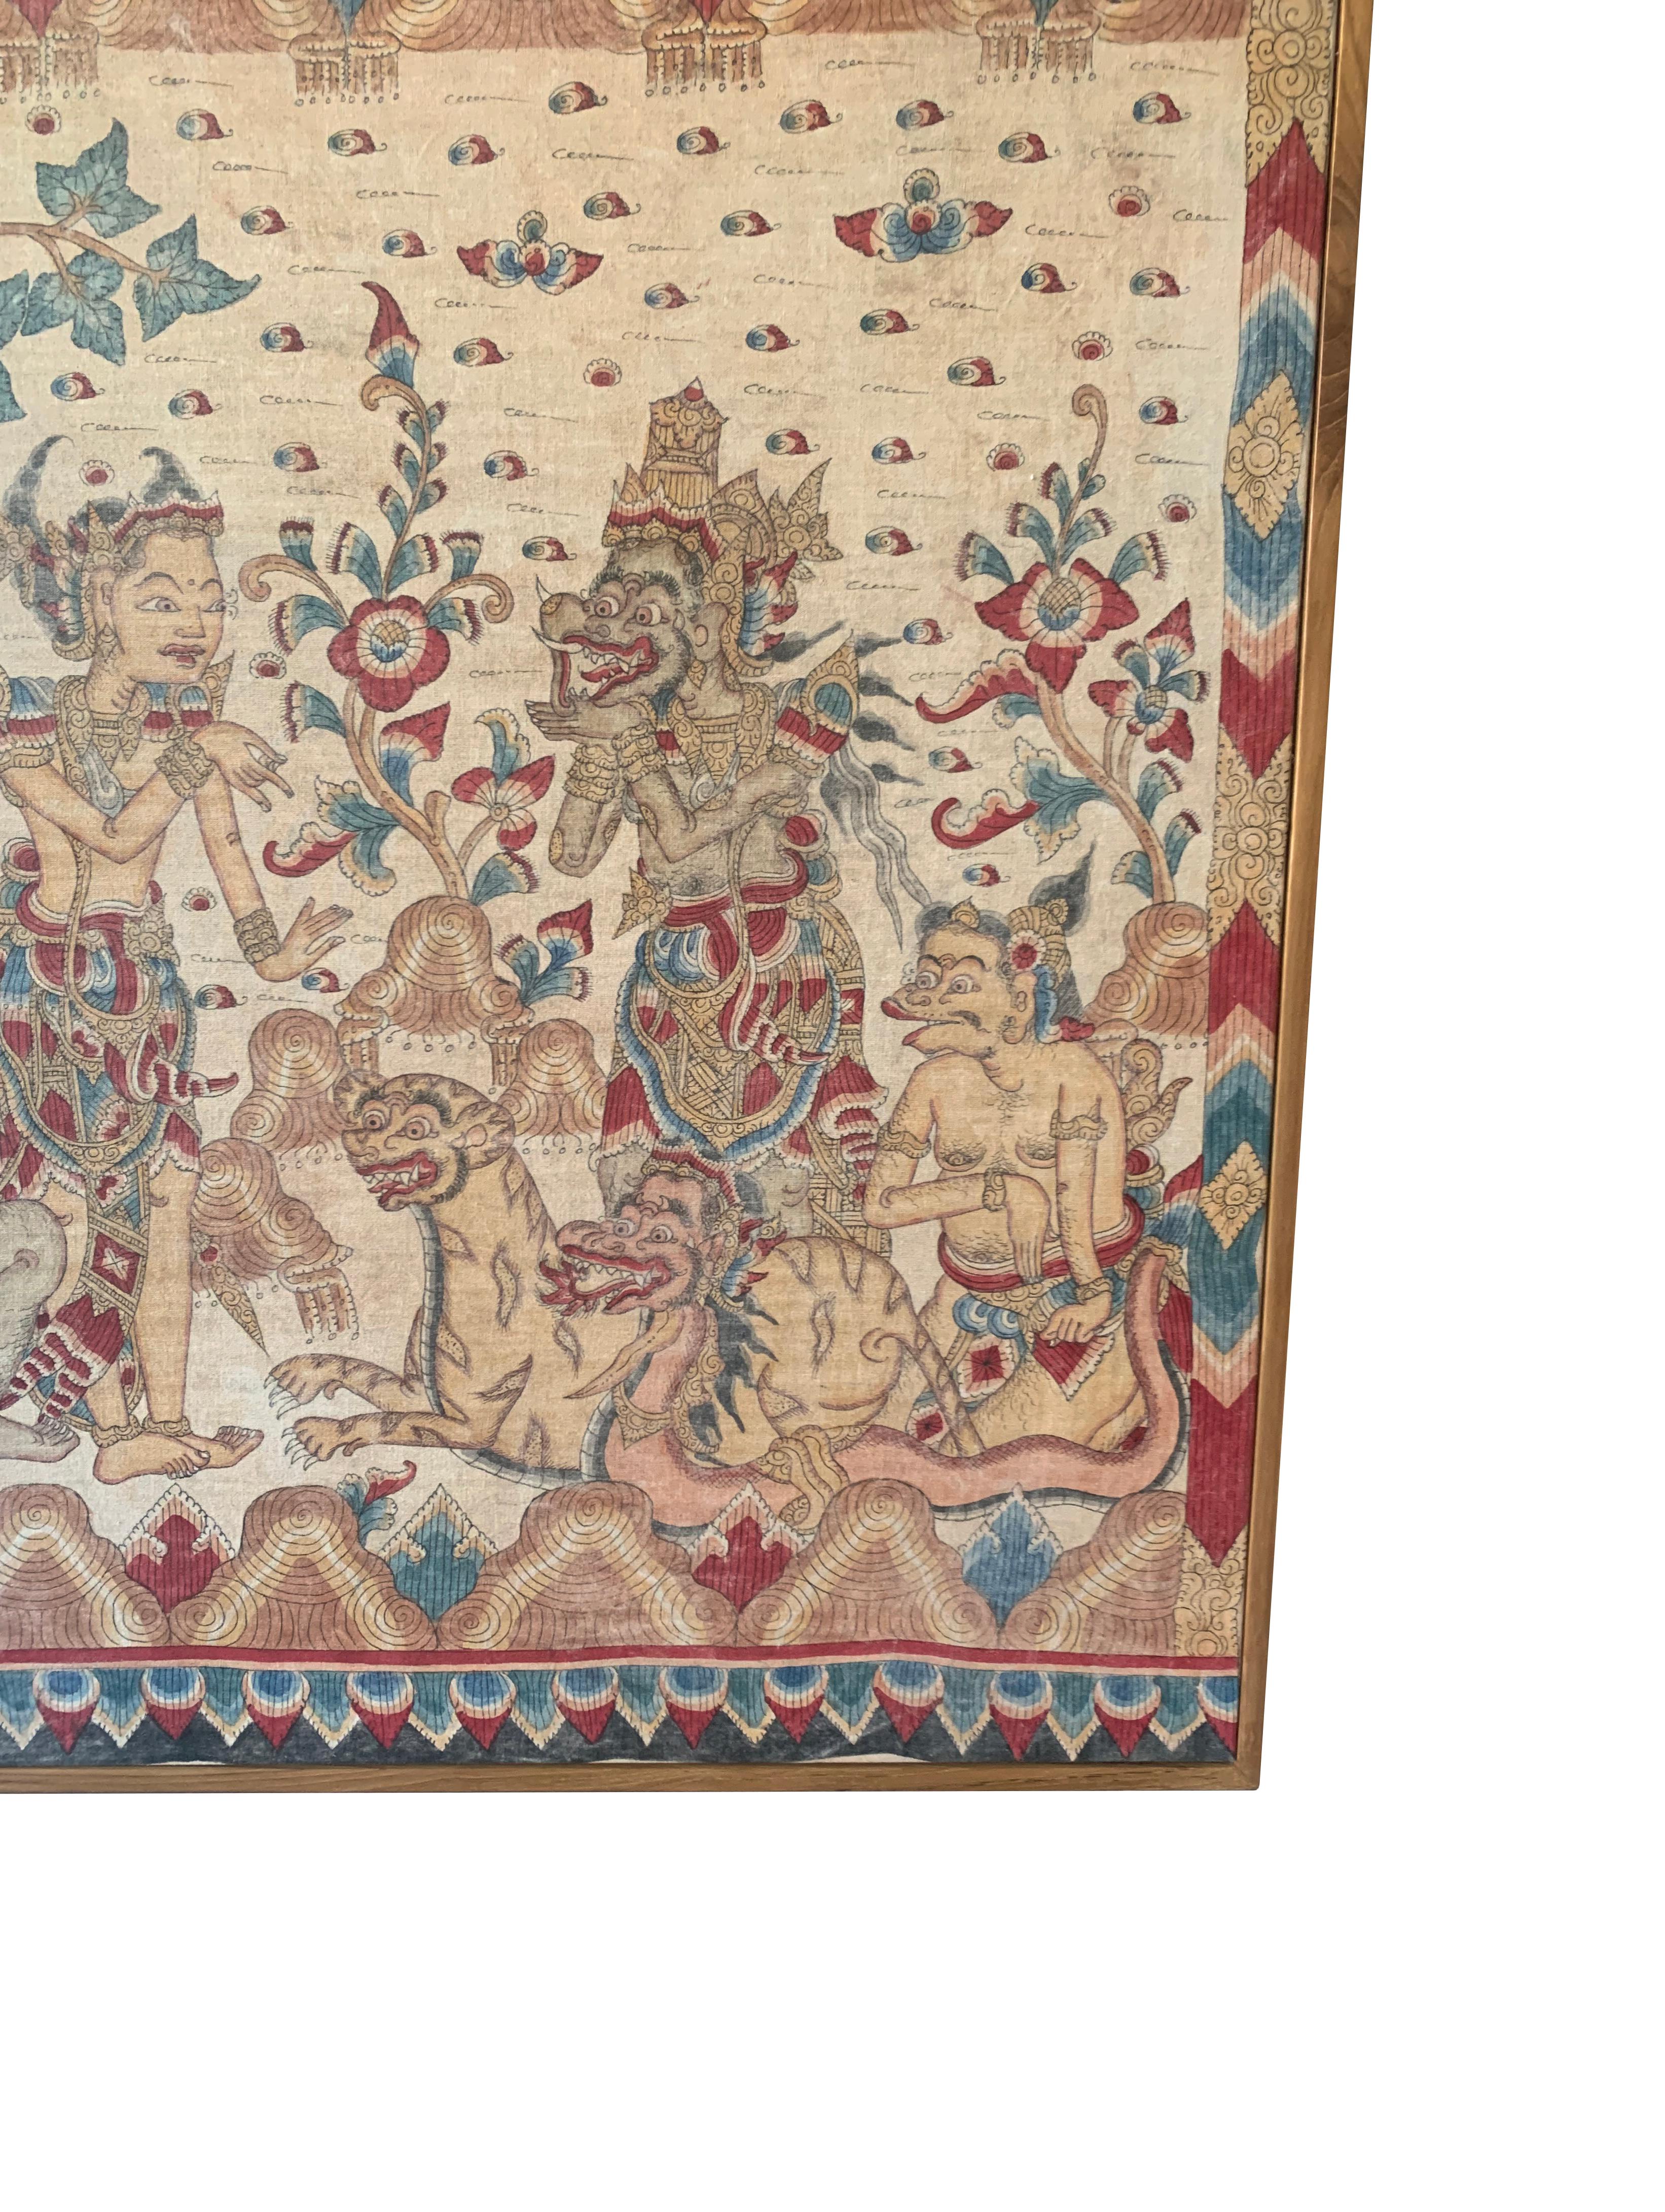 Hand-Painted Bali Hindu Textile Framed 'Kamasan' Painting, Indonesia C. 1950 For Sale